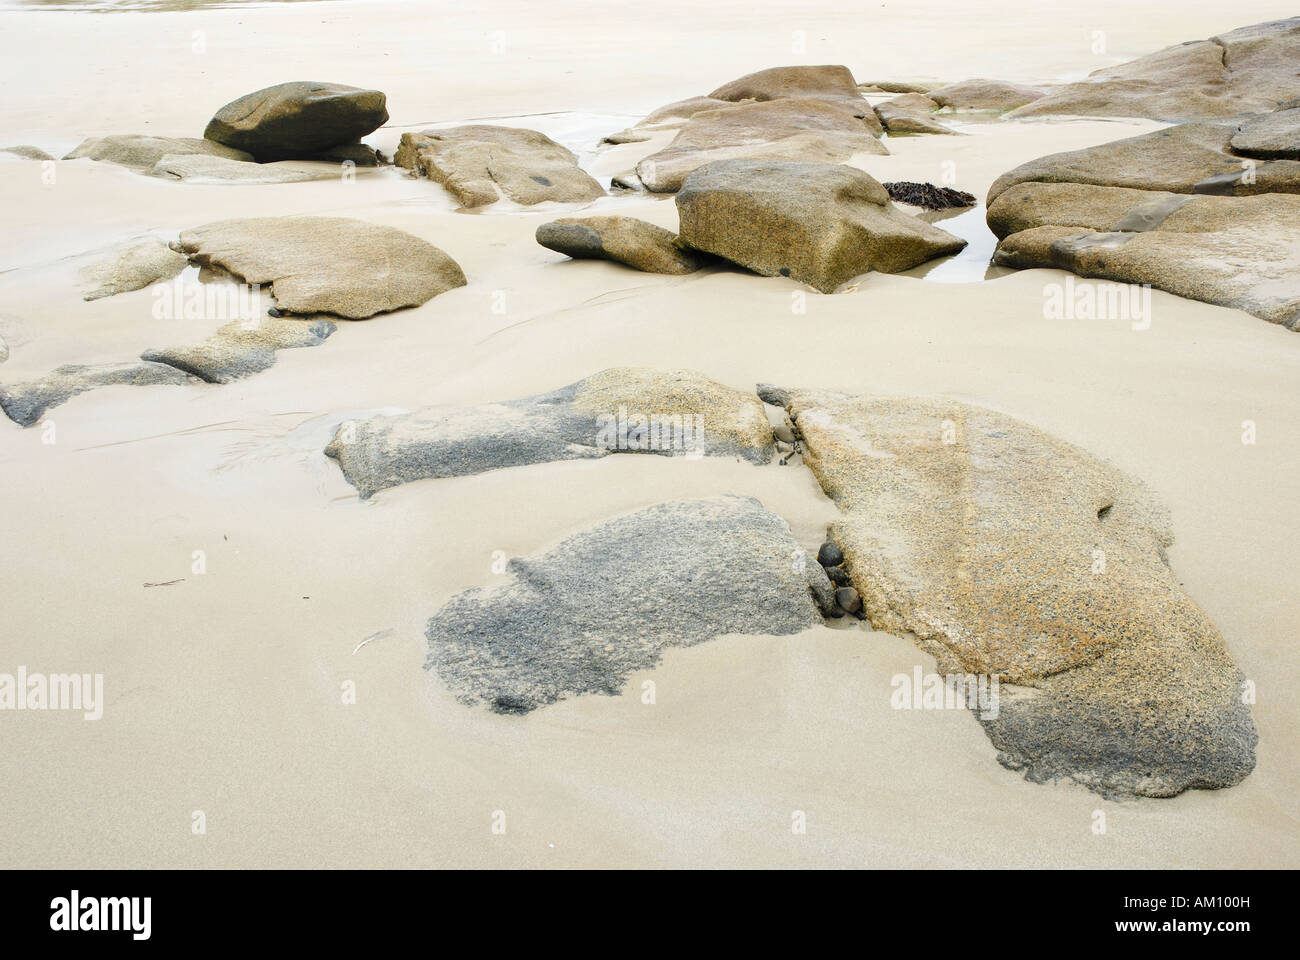 Granite rocks in tidal zone of sandy beach at the Altanic coast of Donegal, Ireland Stock Photo